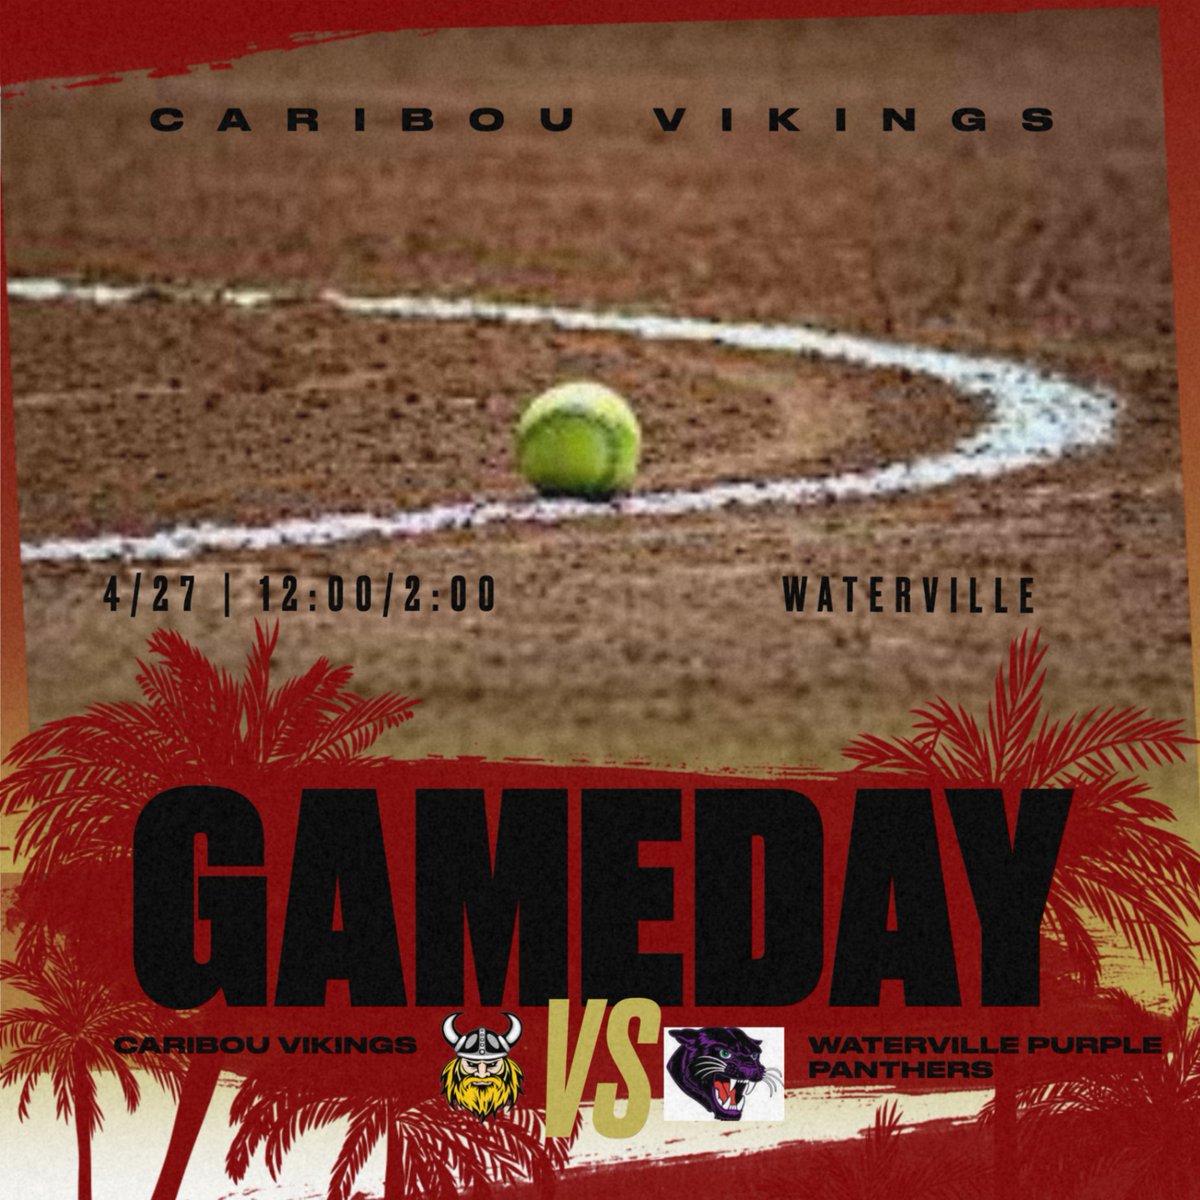 GO VIKINGS!  Softball double header at Waterville!